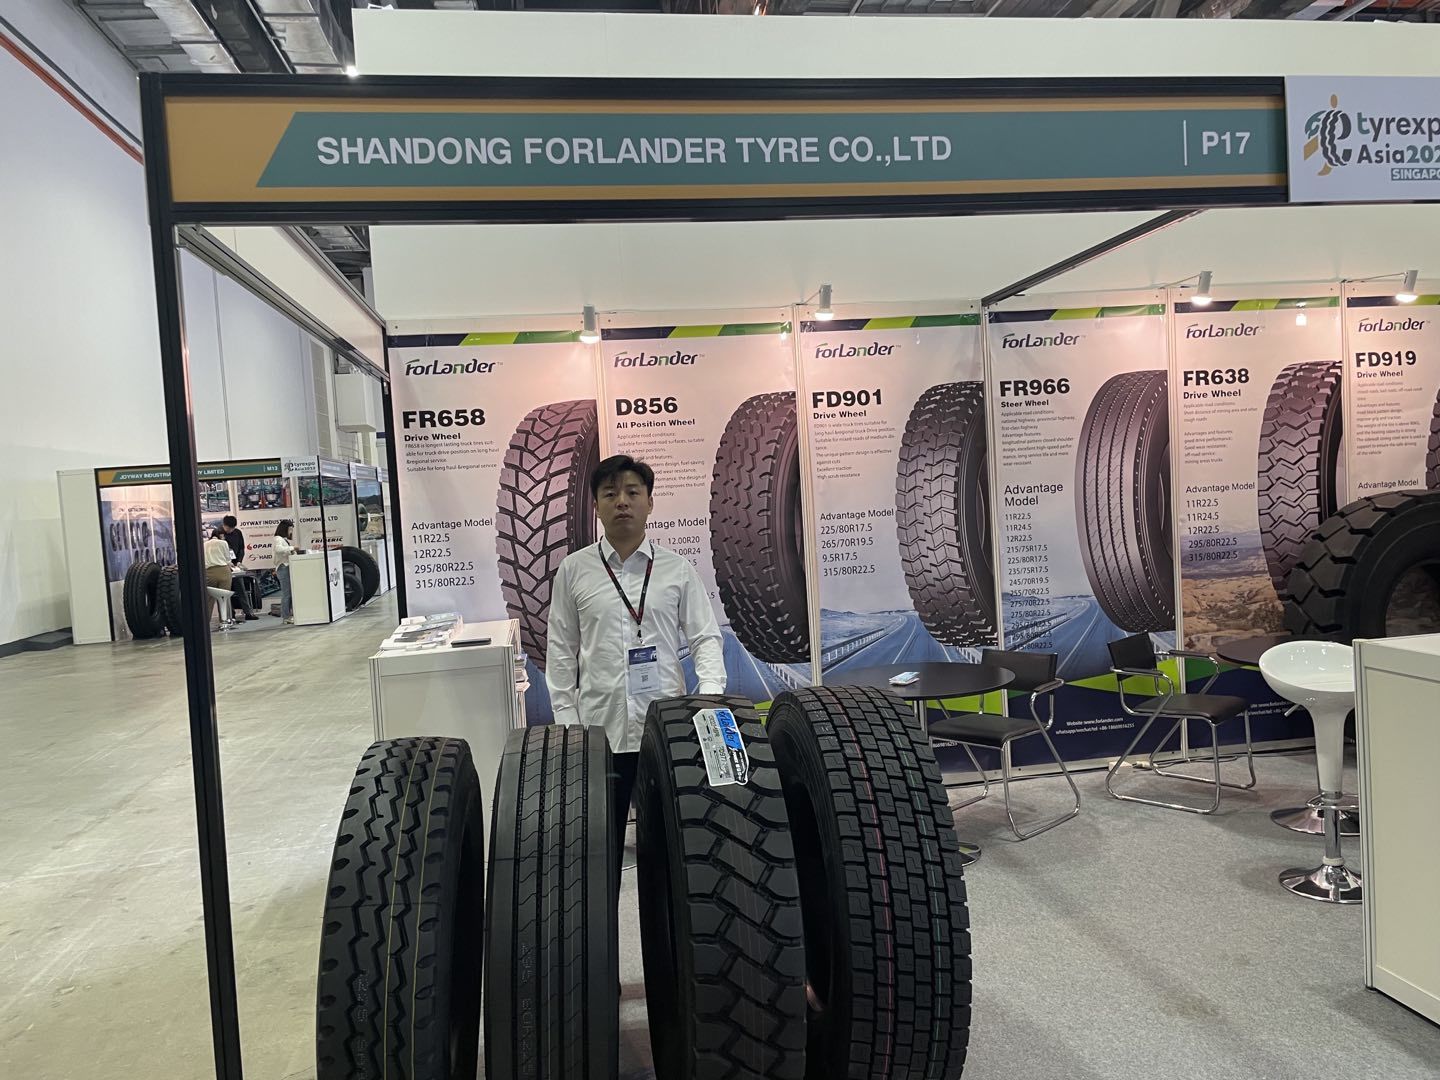 Shandong Forlander Tire in the 2023 Singapore Tire Exhibition